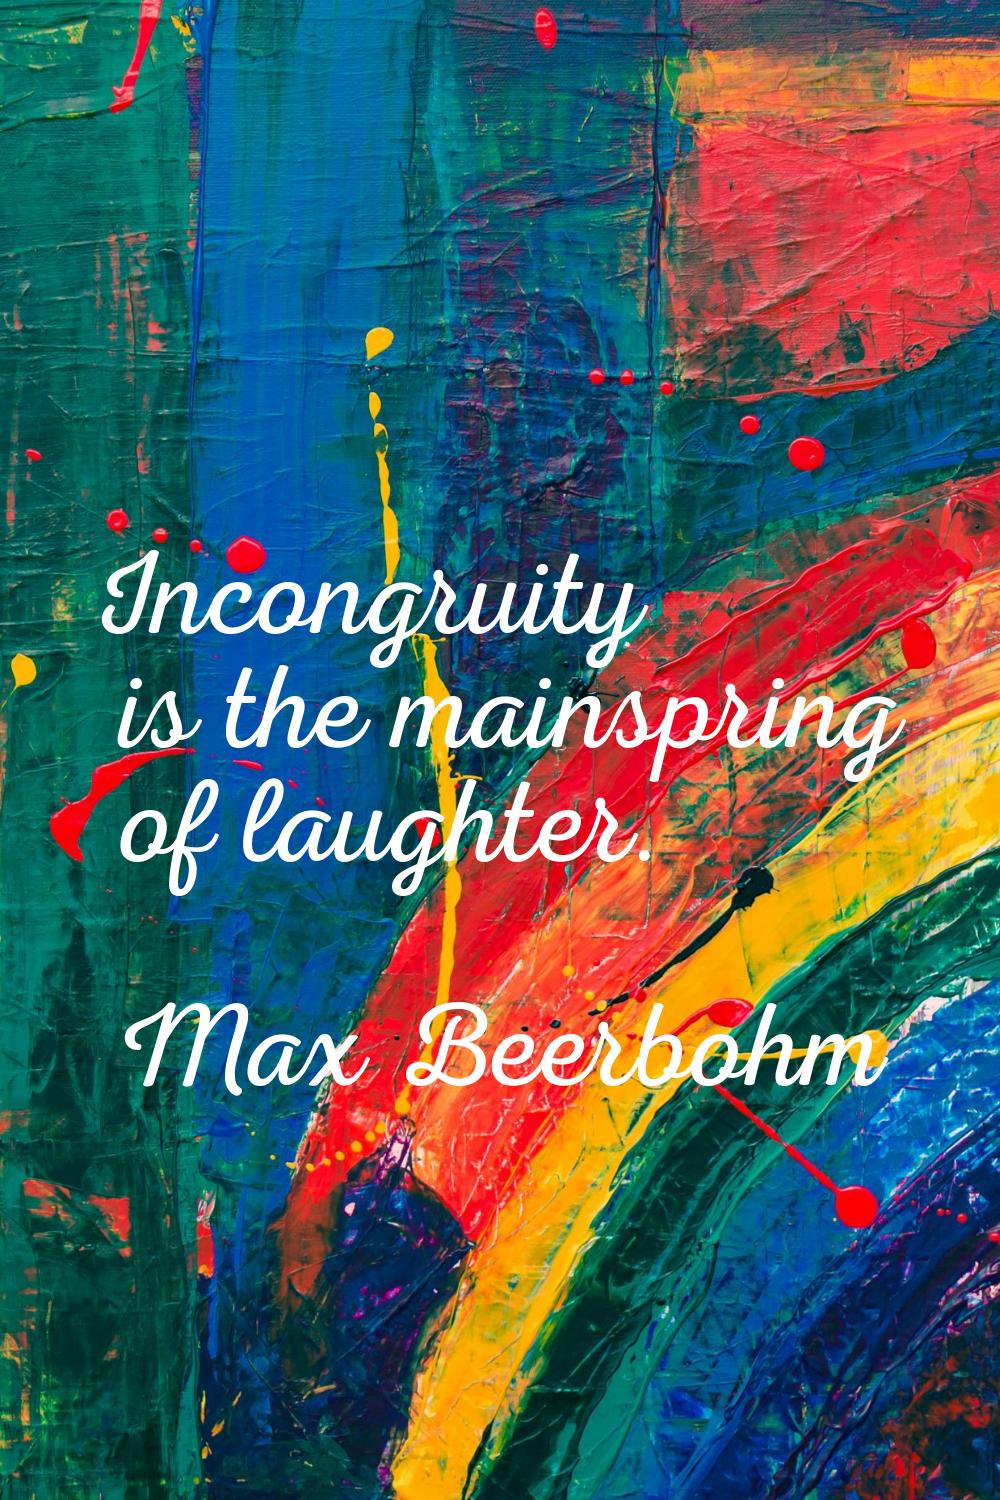 Incongruity is the mainspring of laughter.